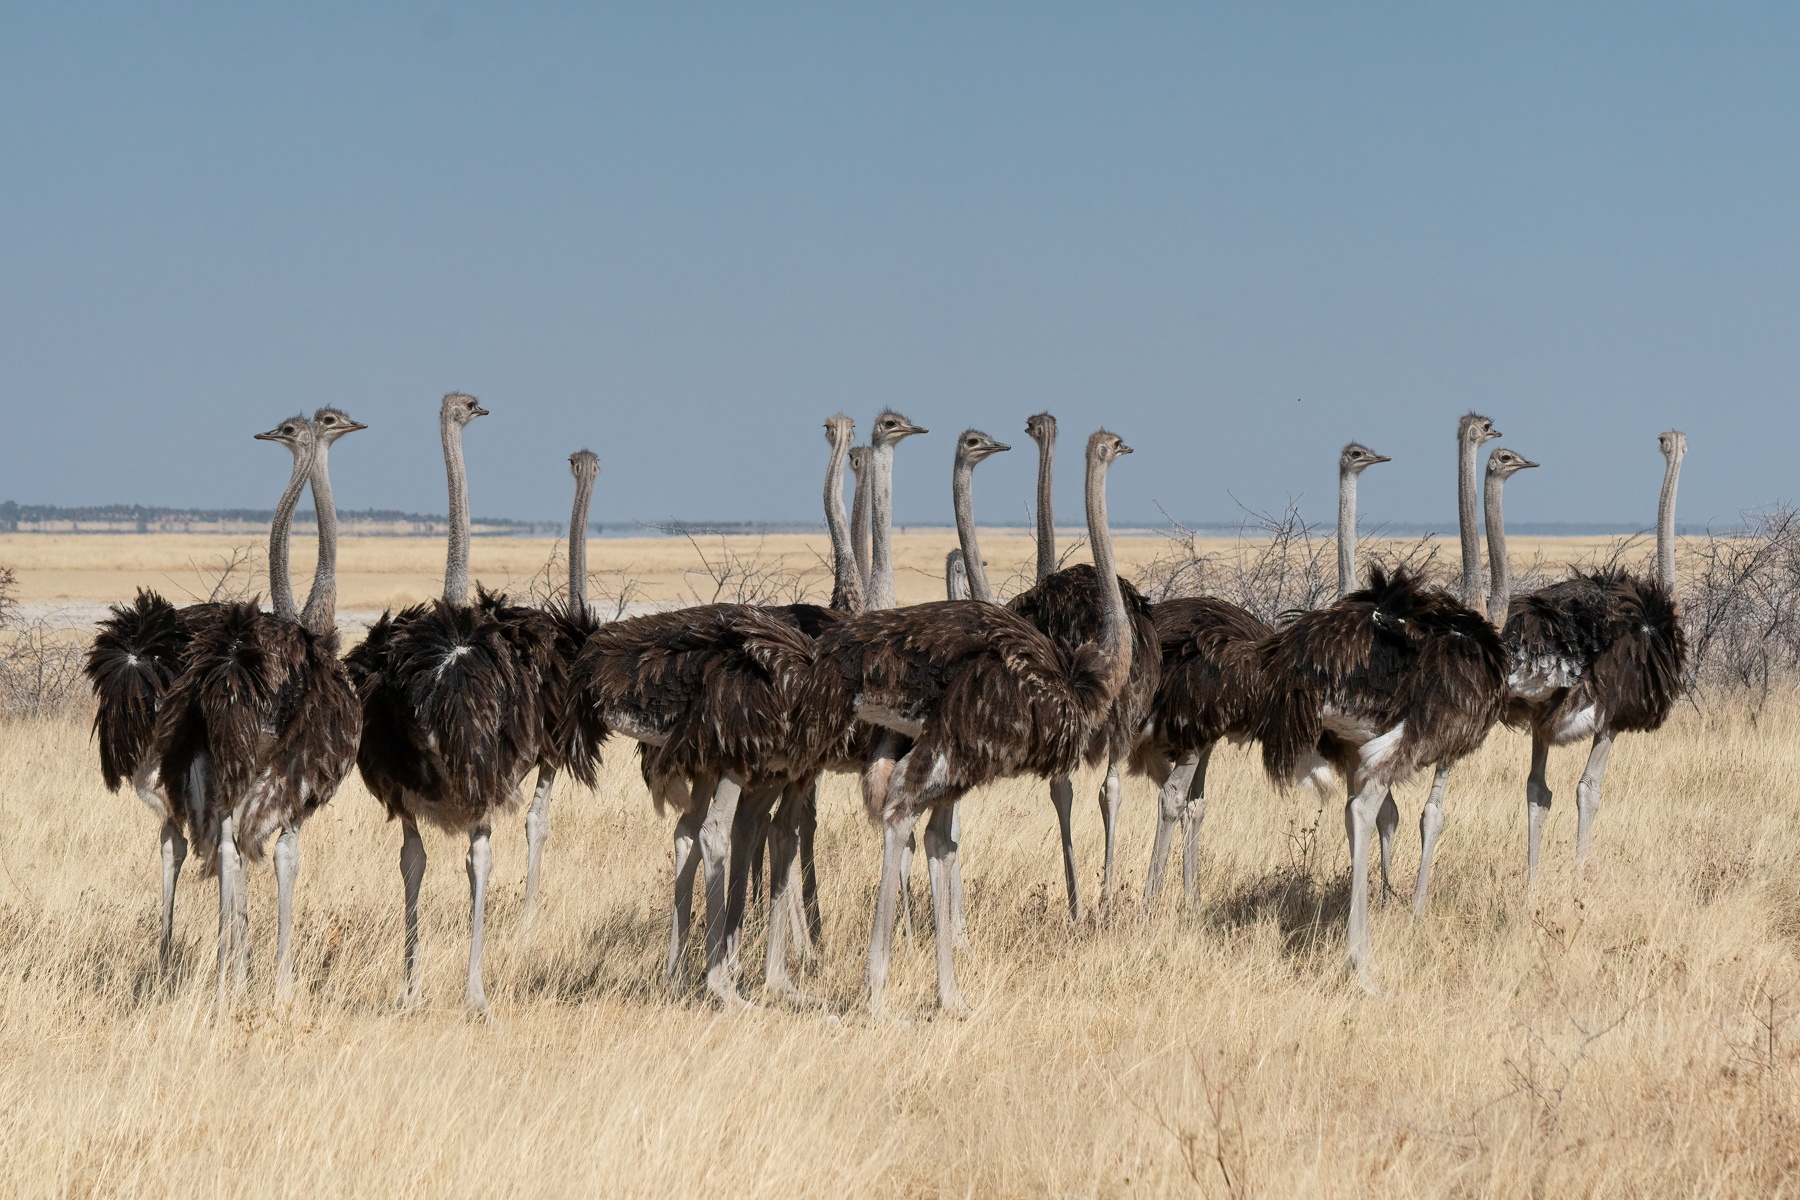 A flock of almost adult Ostrich chicks stick together for safety in Etosha